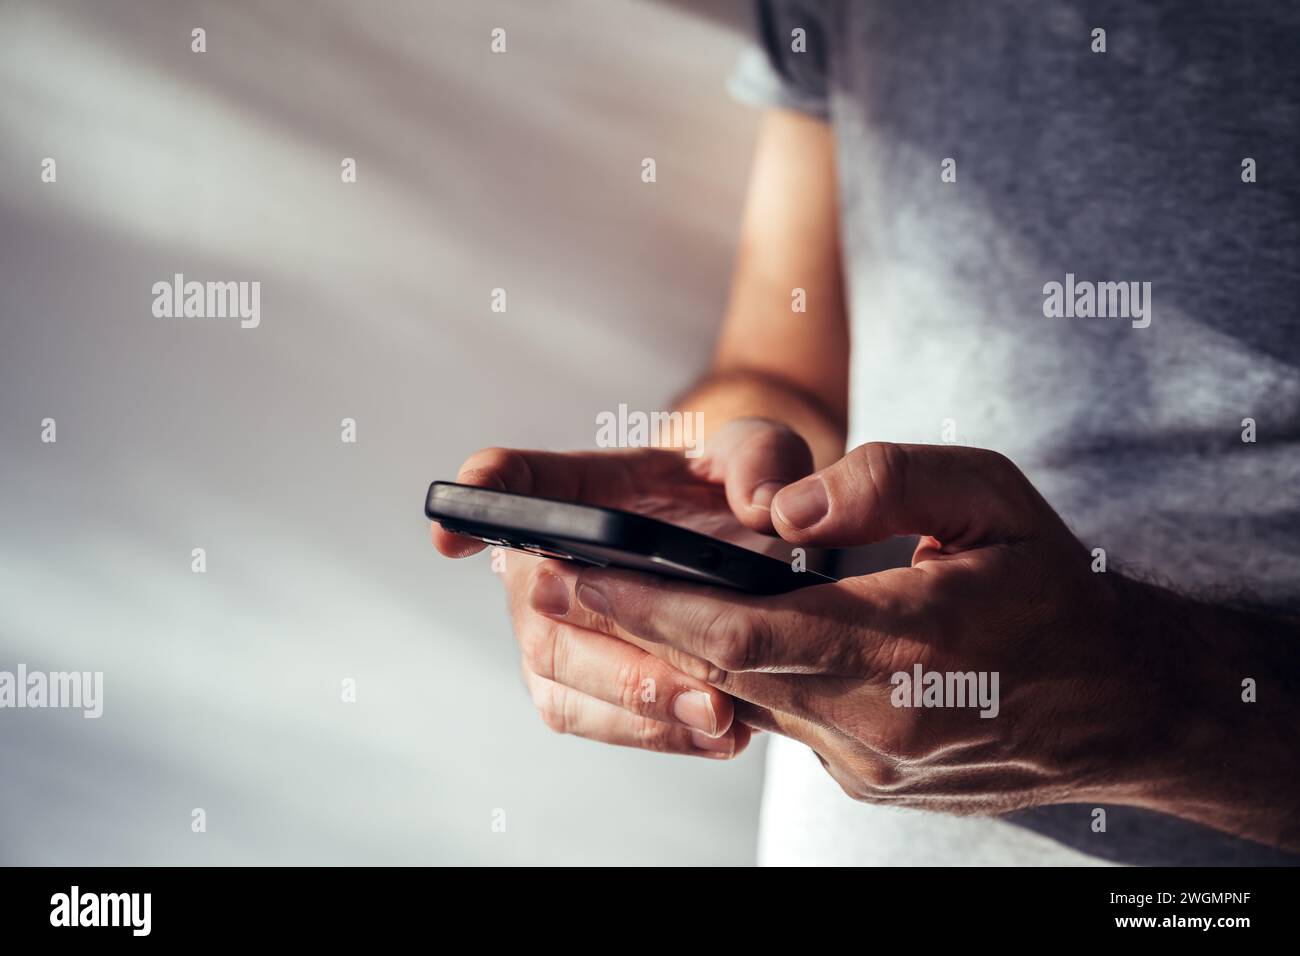 Man using modern smartphone portable information device to type text message, selective focus Stock Photo